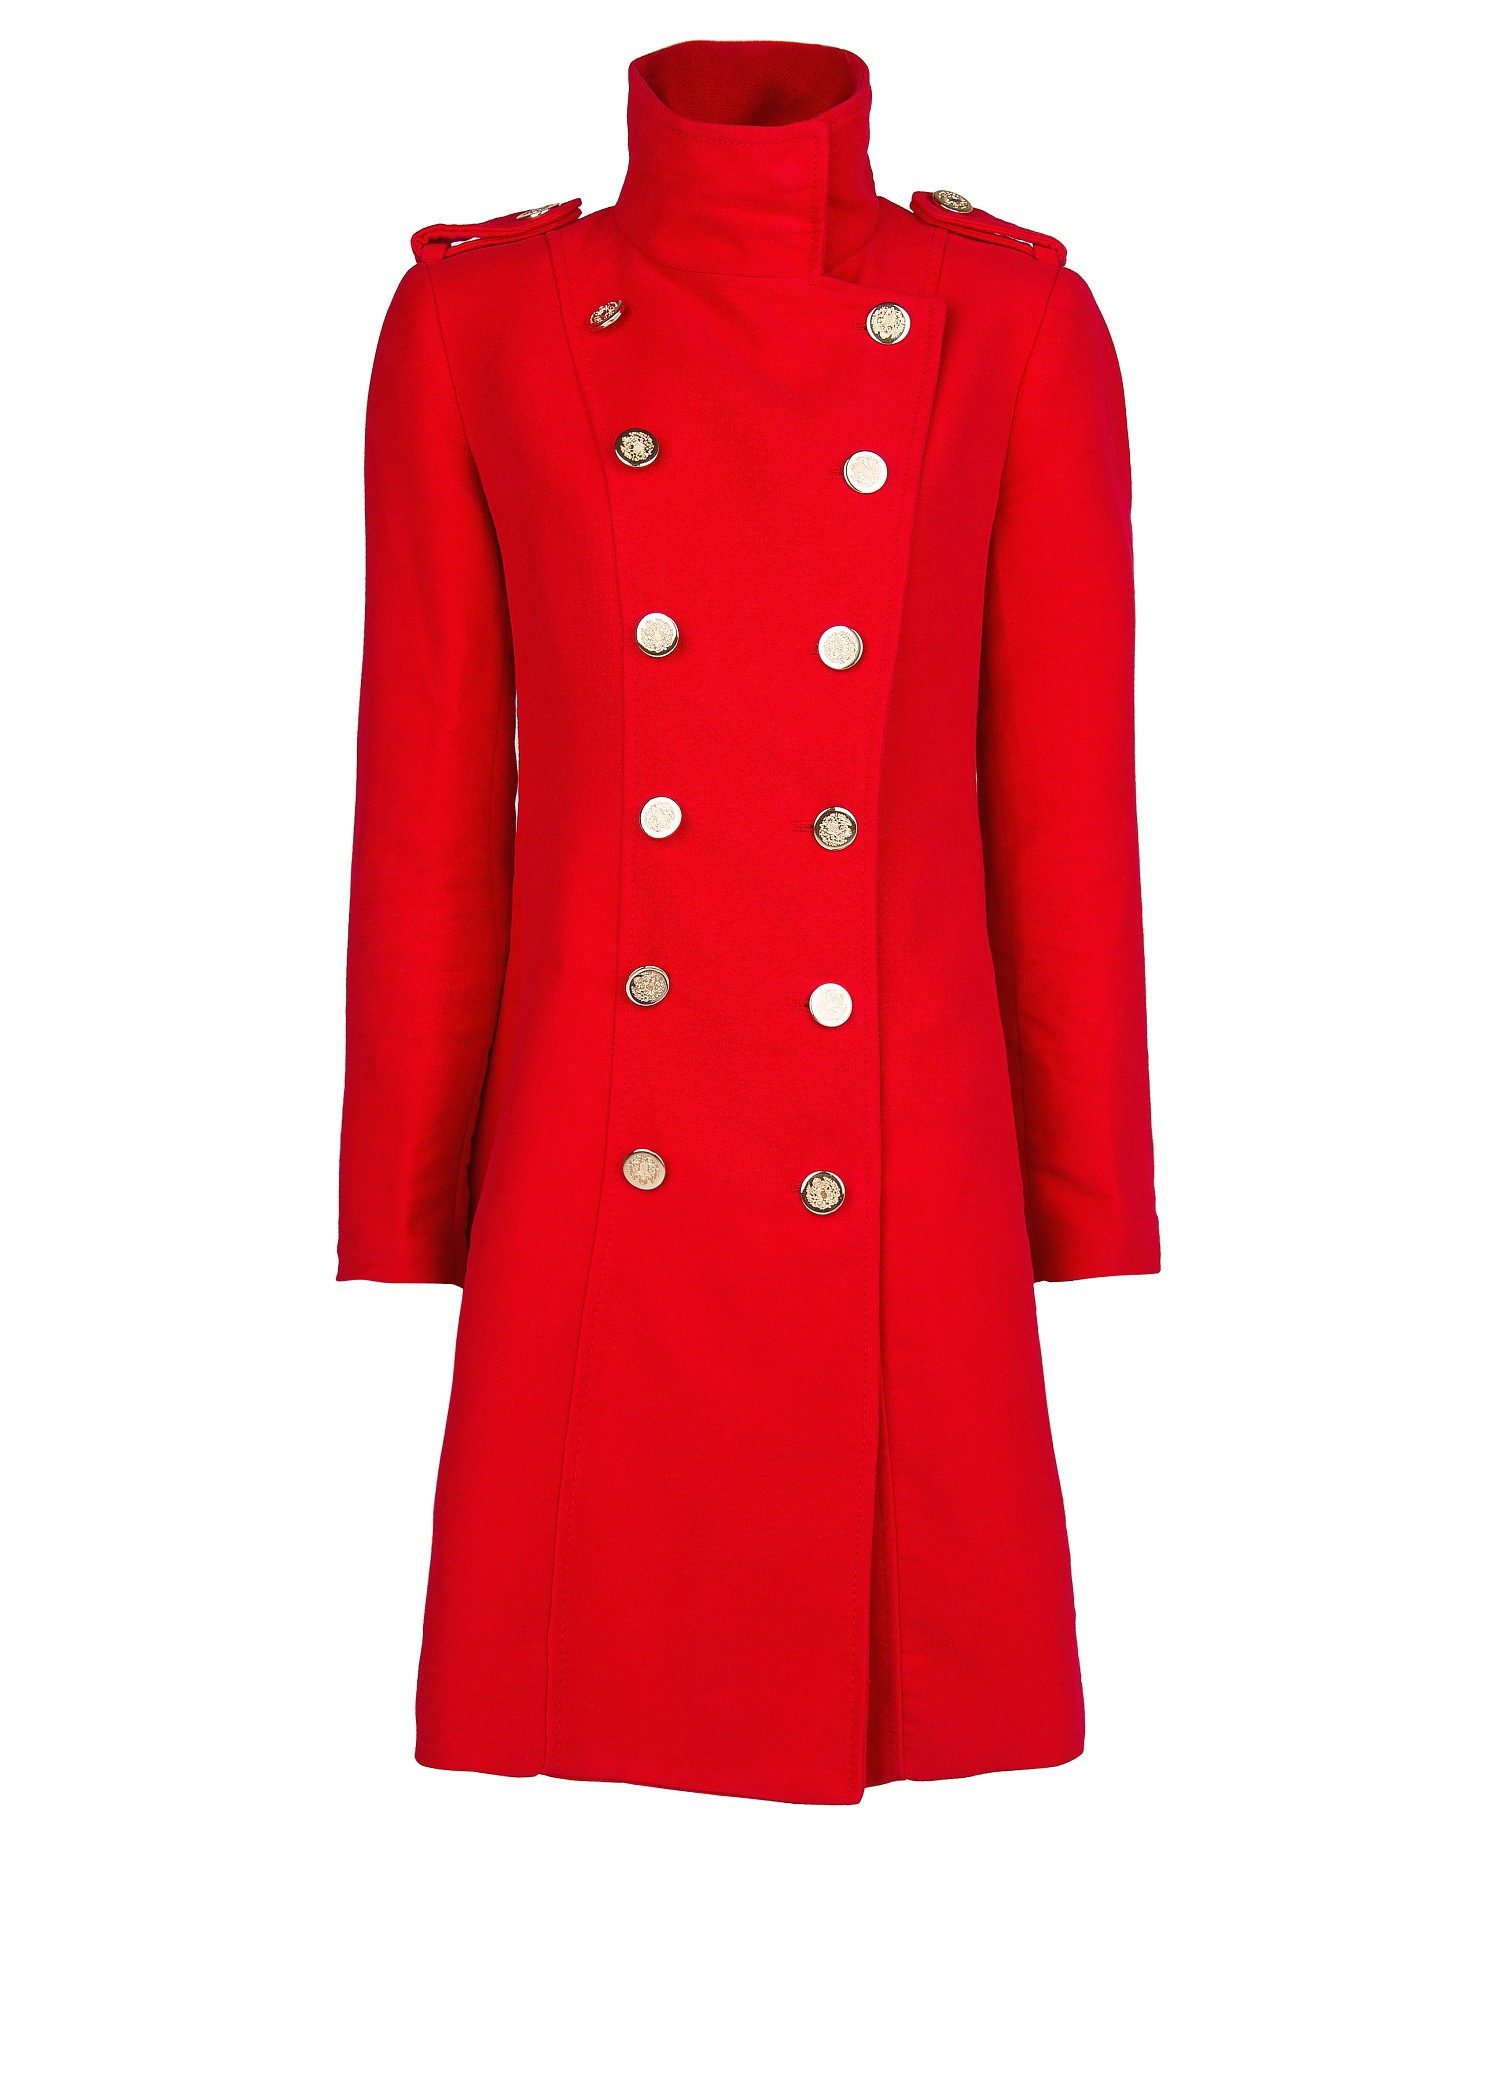 Lyst - Mango Double Breasted Long Coat in Red